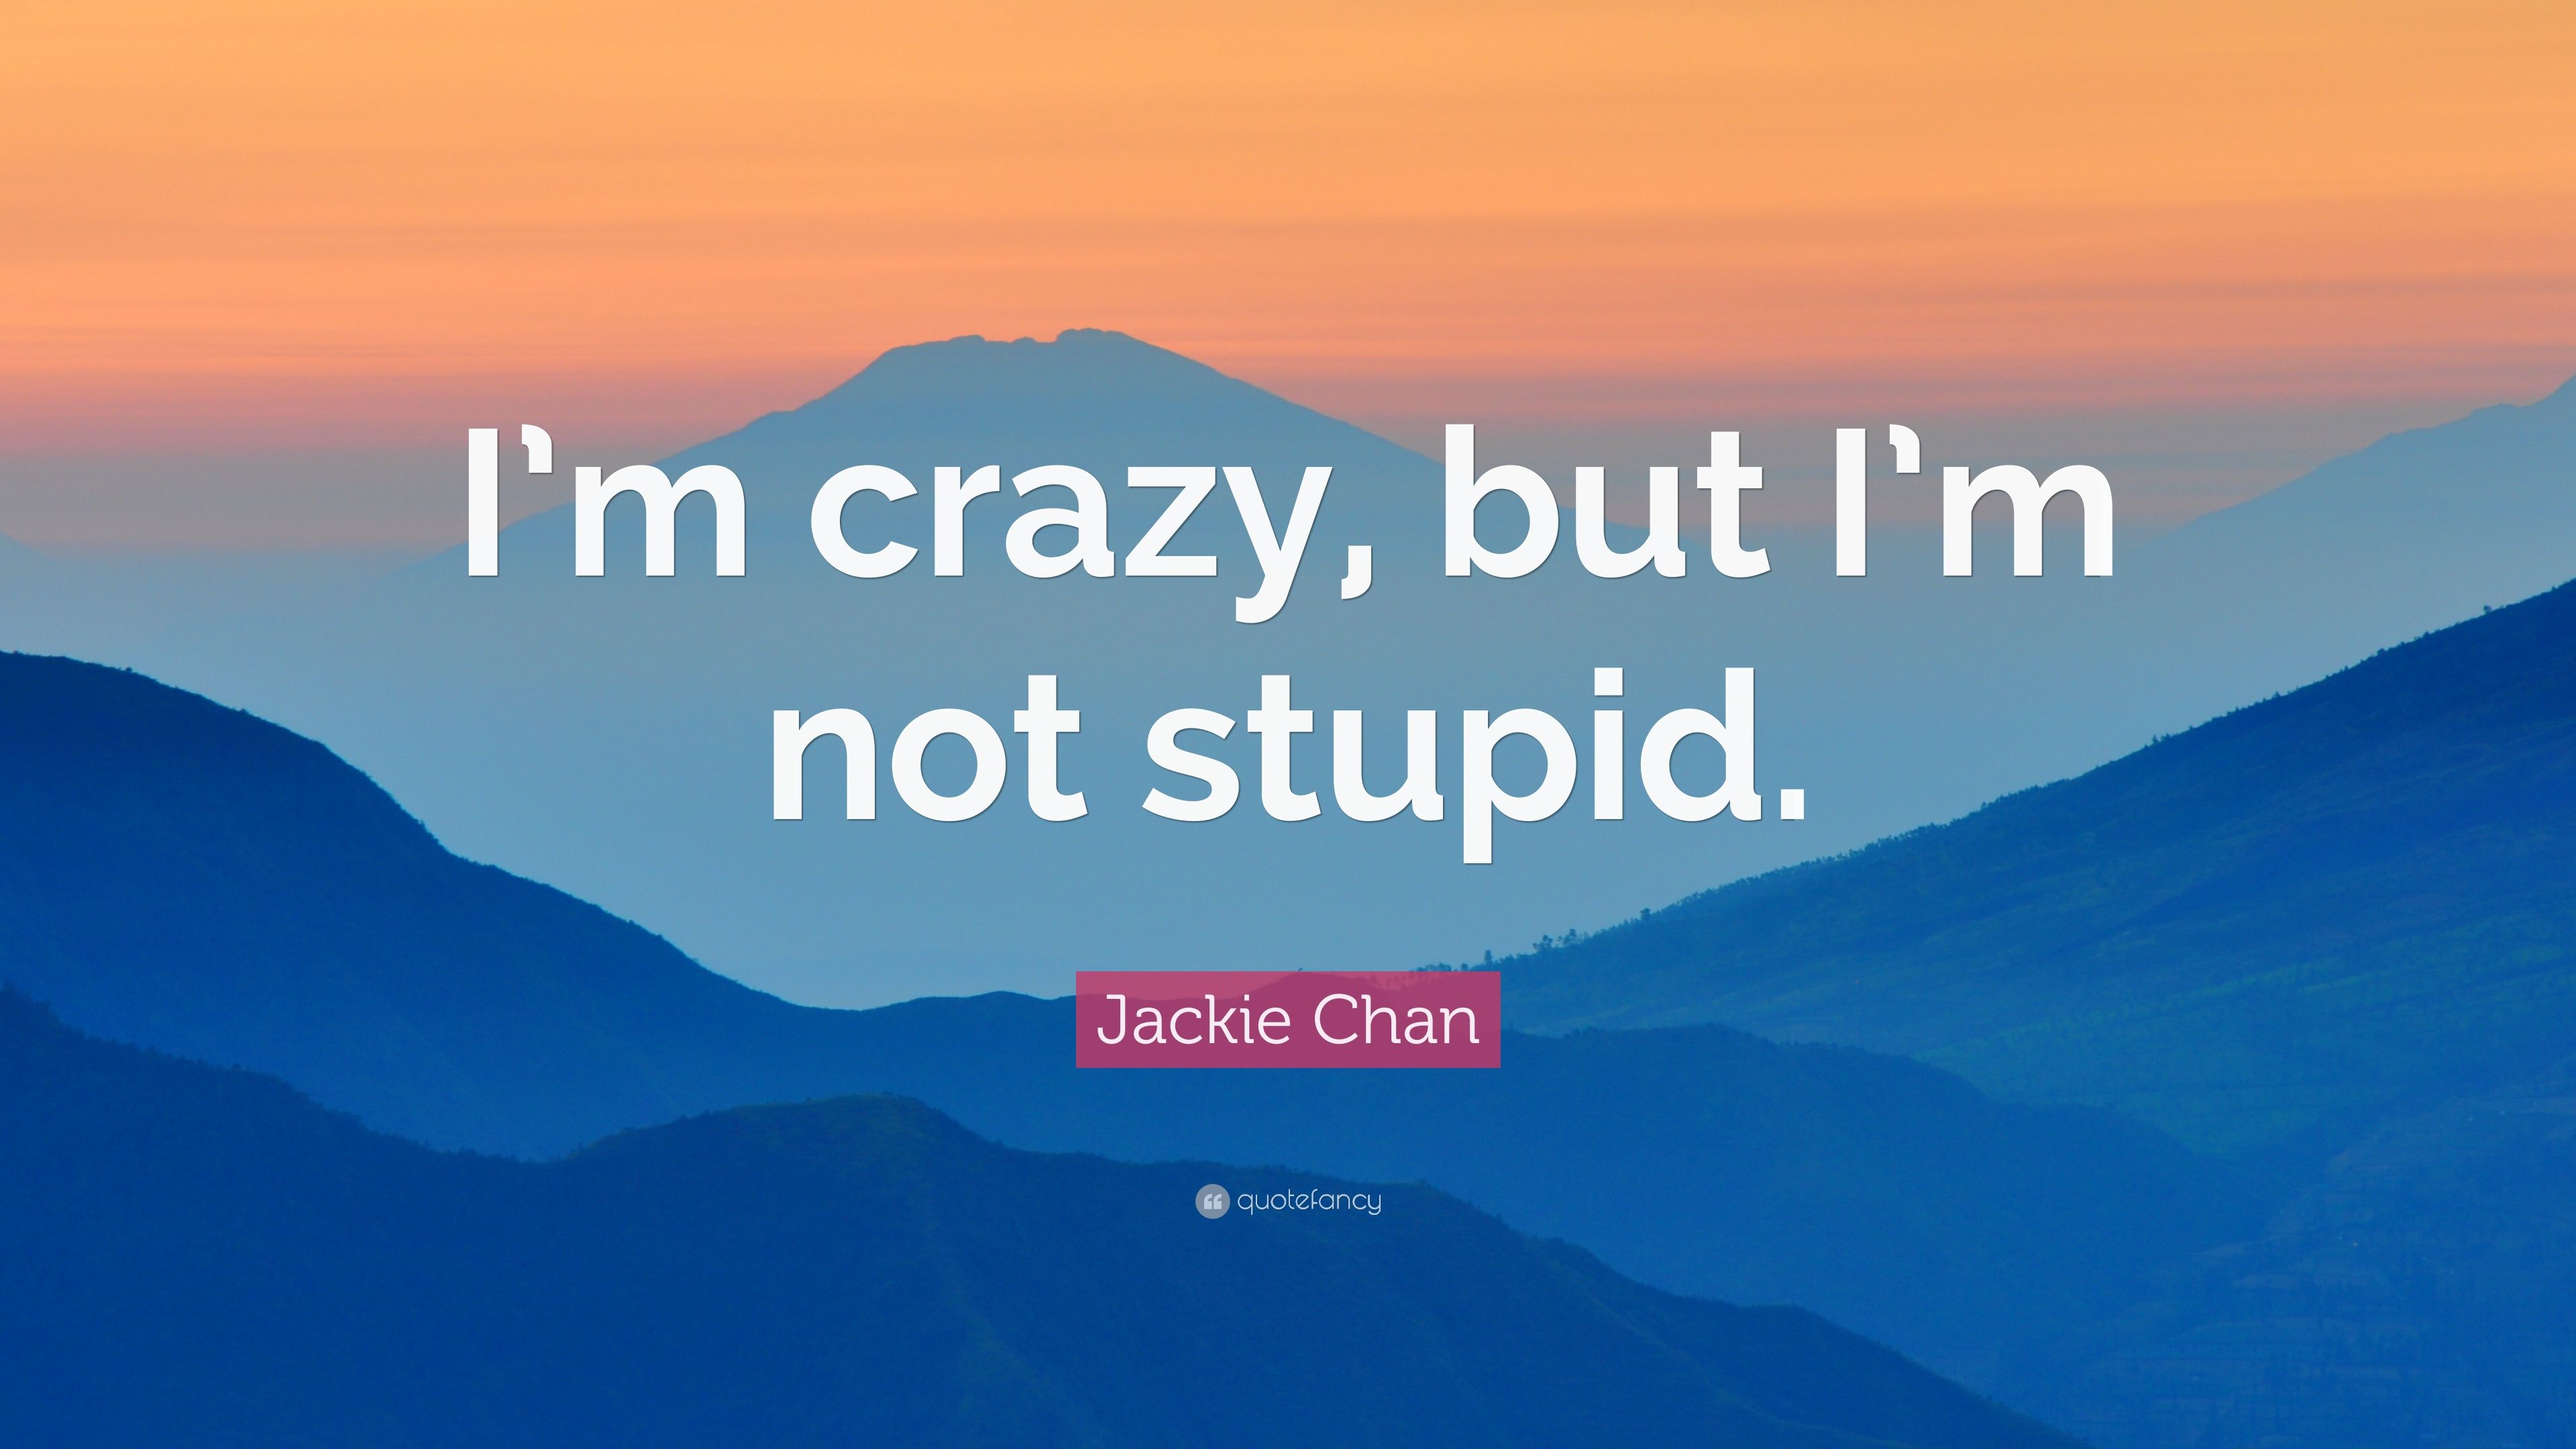 Jackie Chan Quote: “I'm crazy, but I'm not stupid.”